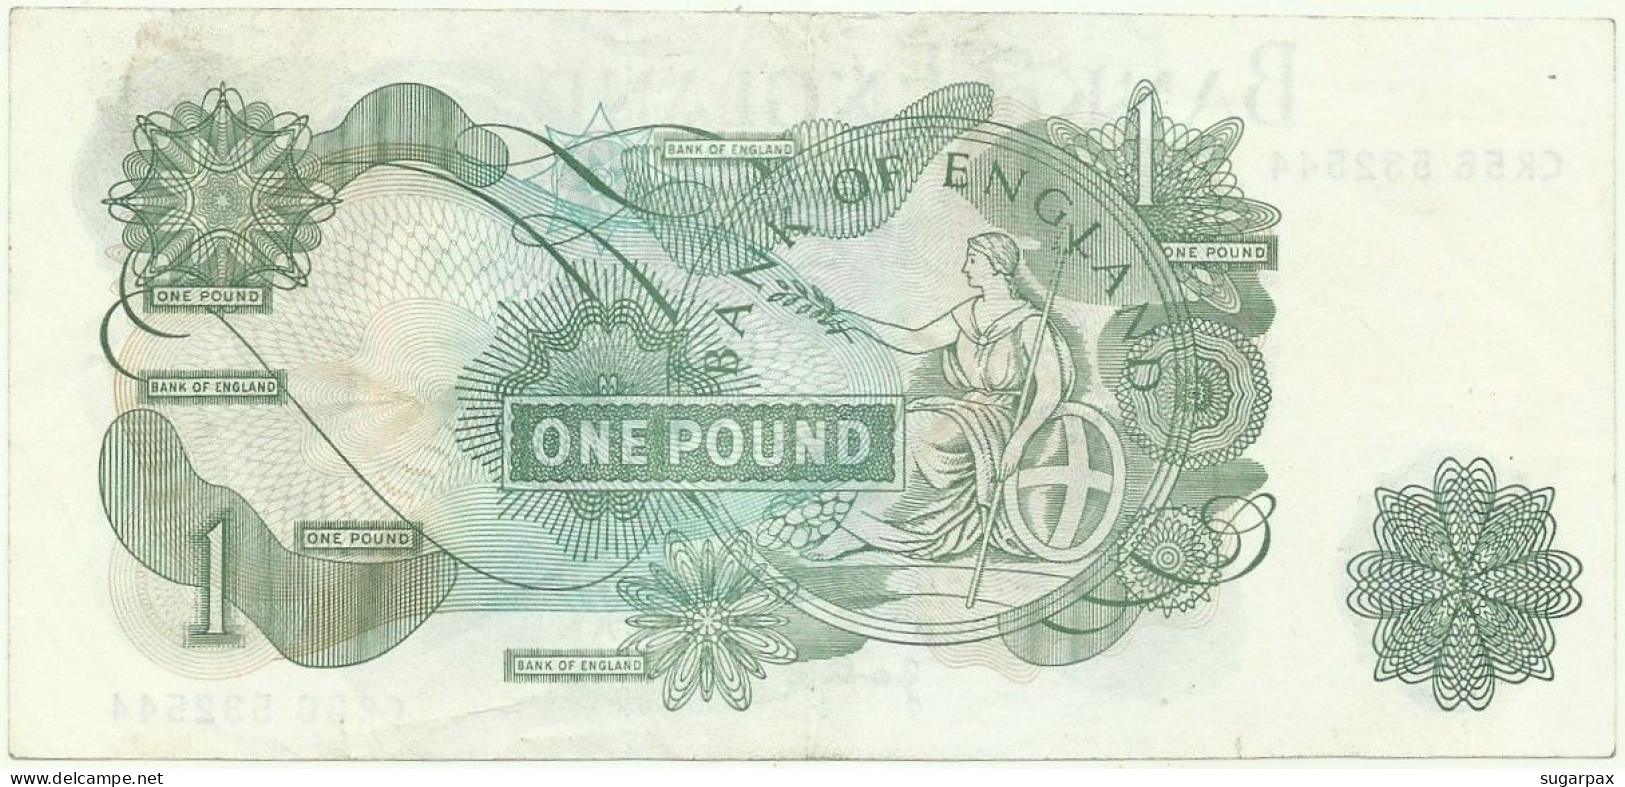 GREAT BRITAIN - 1 POUND - ND ( 1970-77 ) - P 374 G - Serie CR56 - BANK OF ENGLAND - United Kingdom - 1 Pound